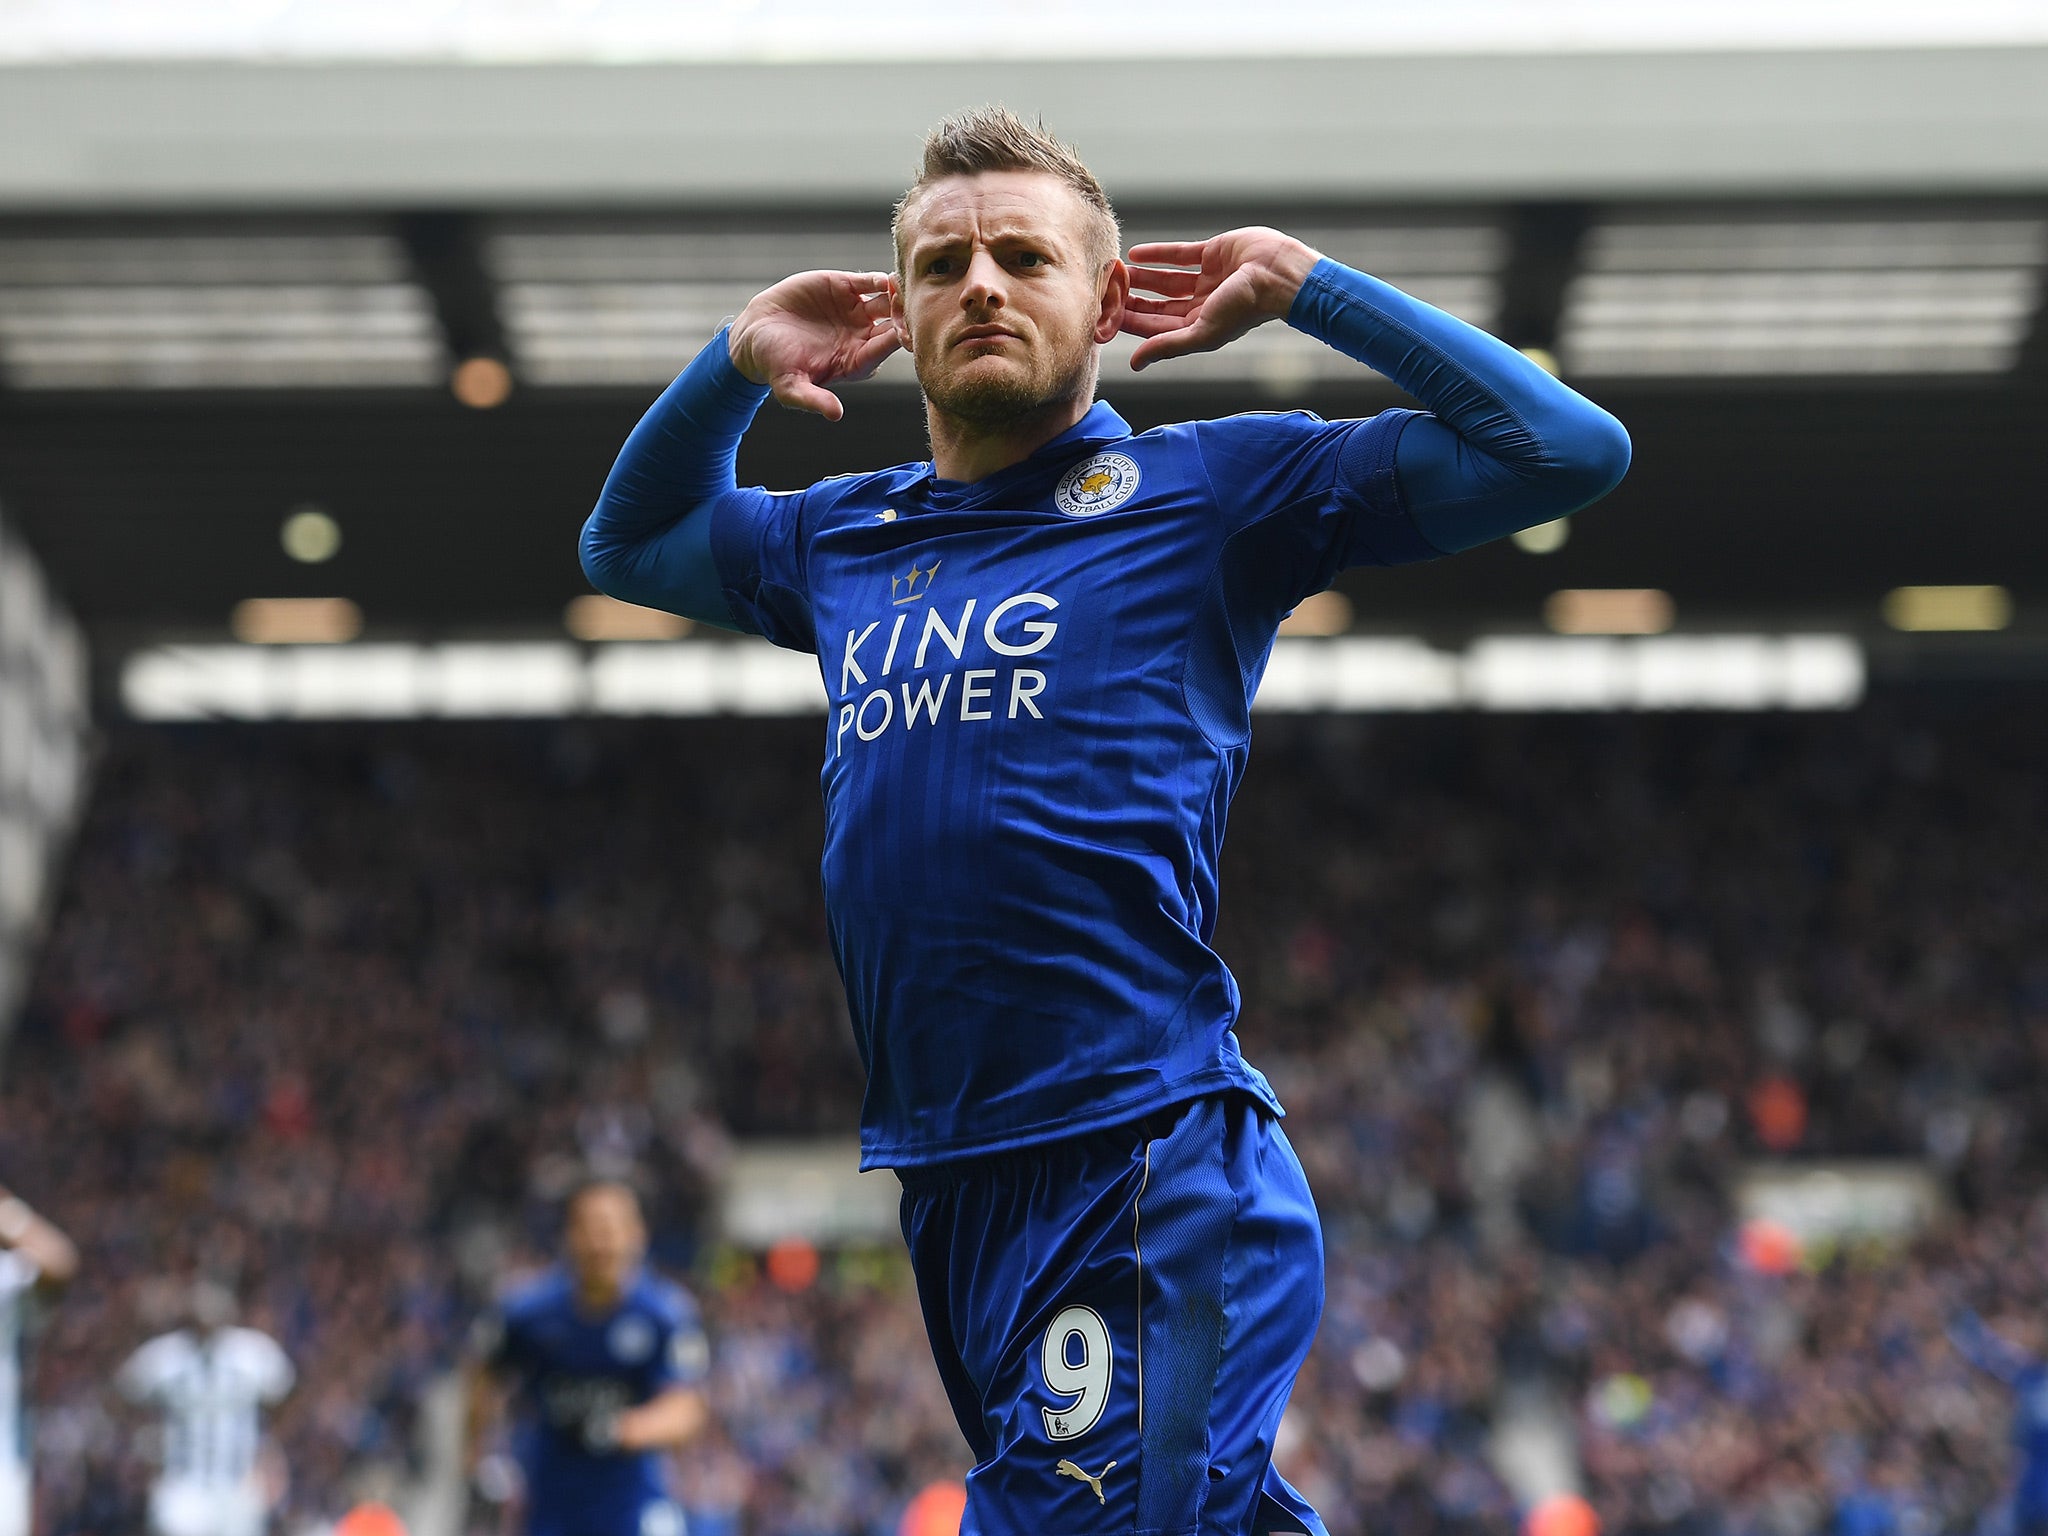 Jamie Vardy maintained his rich vein of scoring form to secure an important three points